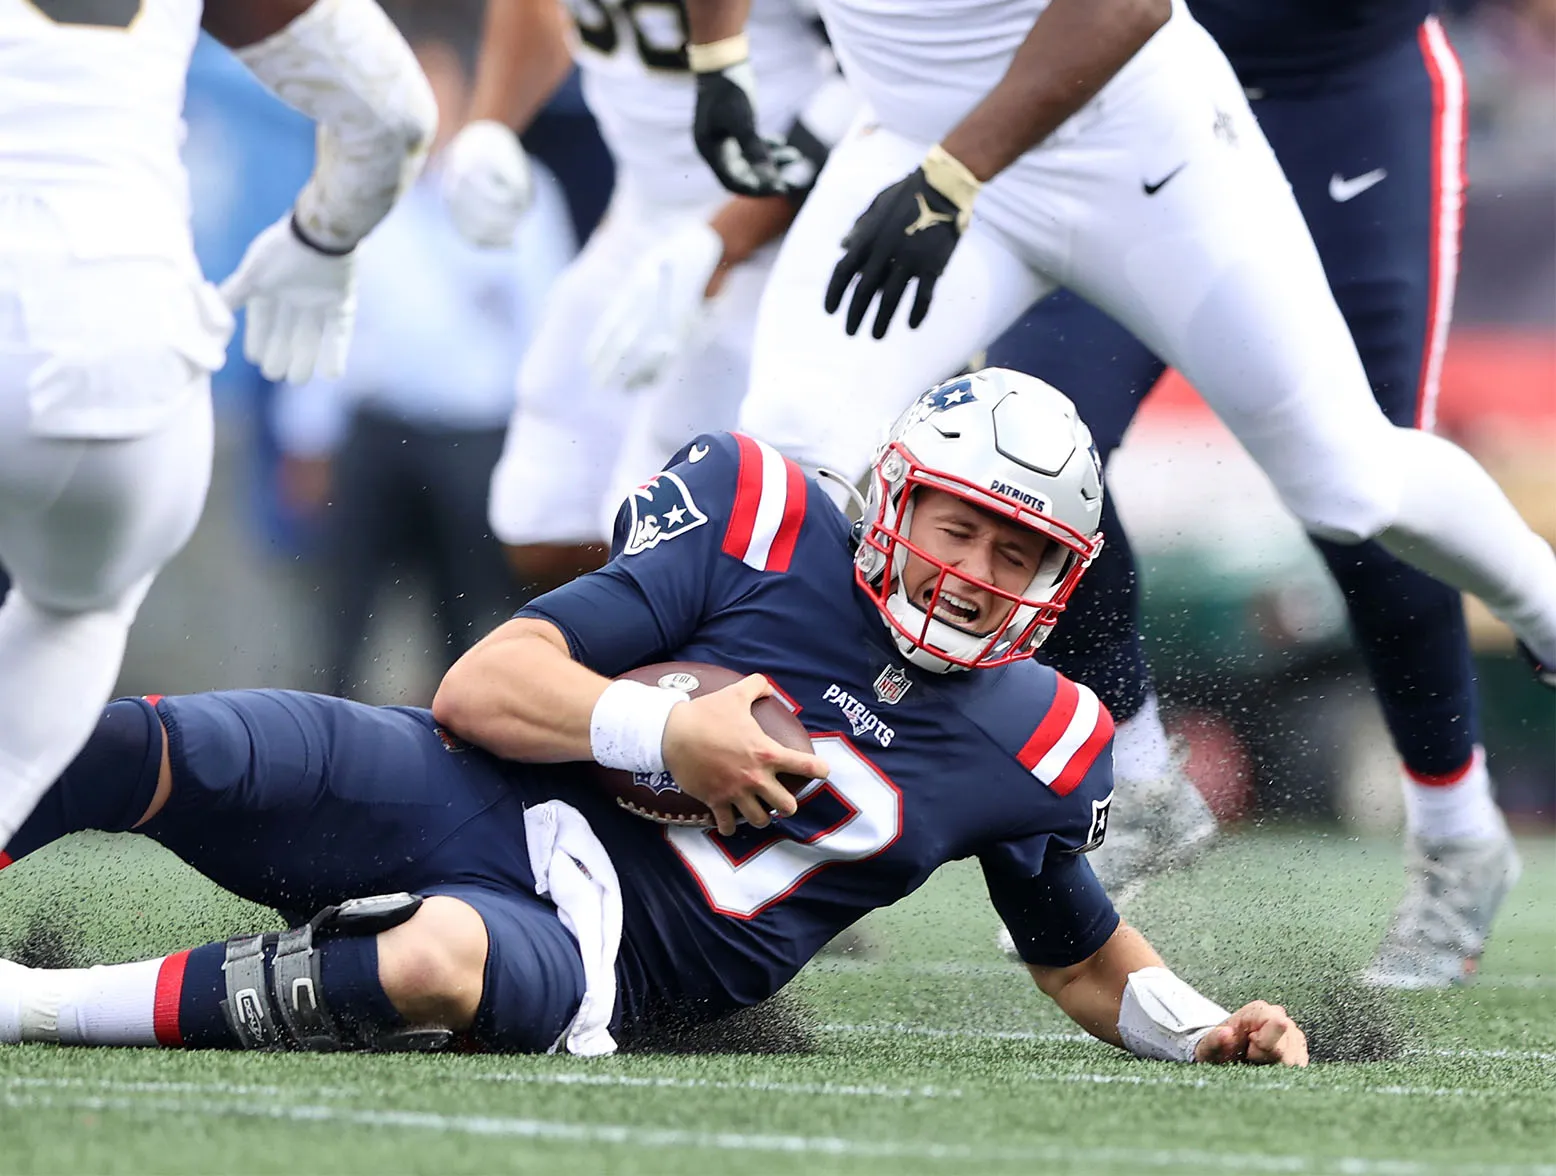 FOXBOROUGH, MASSACHUSETTS - SEPTEMBER 26: Quarterback Mac Jones #10 of the New England Patriots slides on the turf during the game against the New Orleans Saints at Gillette Stadium on September 26, 2021 in Foxborough, Massachusetts. (Photo by Elsa/Getty Images)